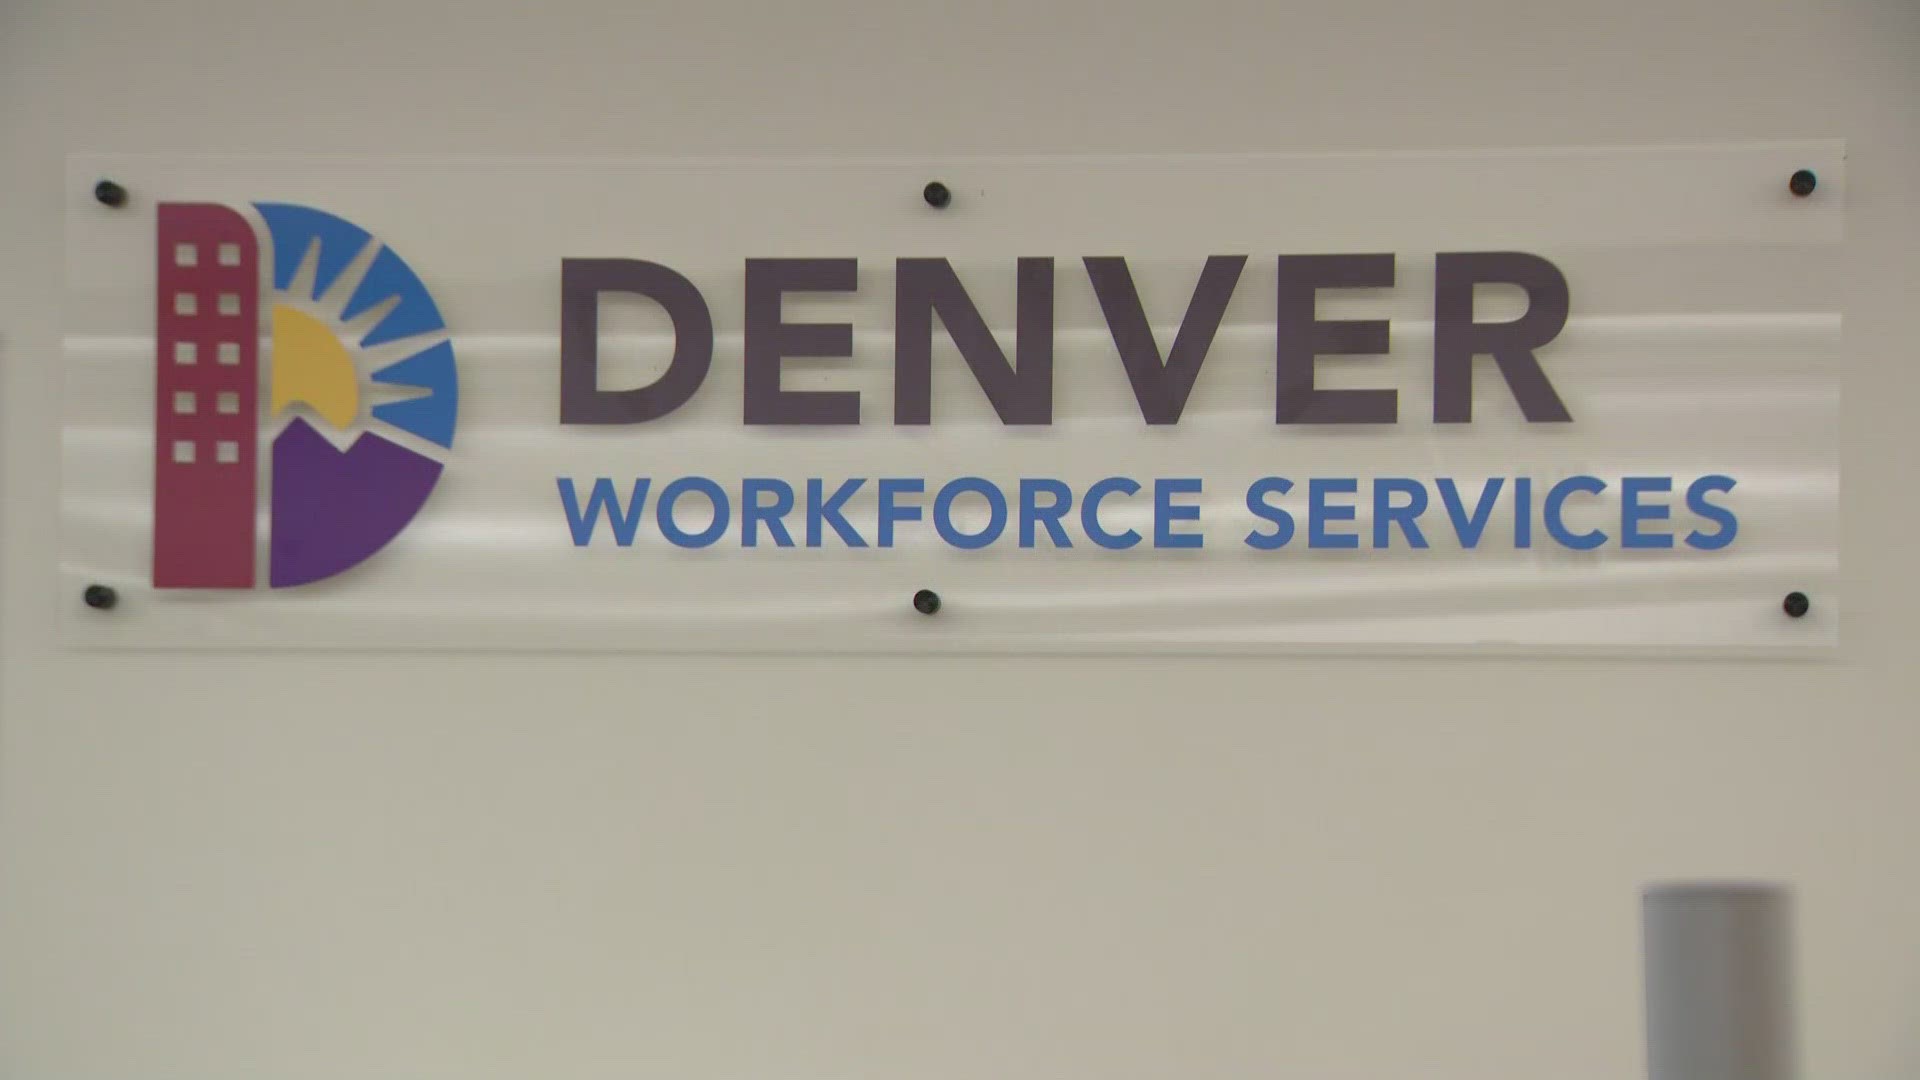 Denver Workforce Services is expanding access to its free services for jobseekers with new office in downtown Denver.